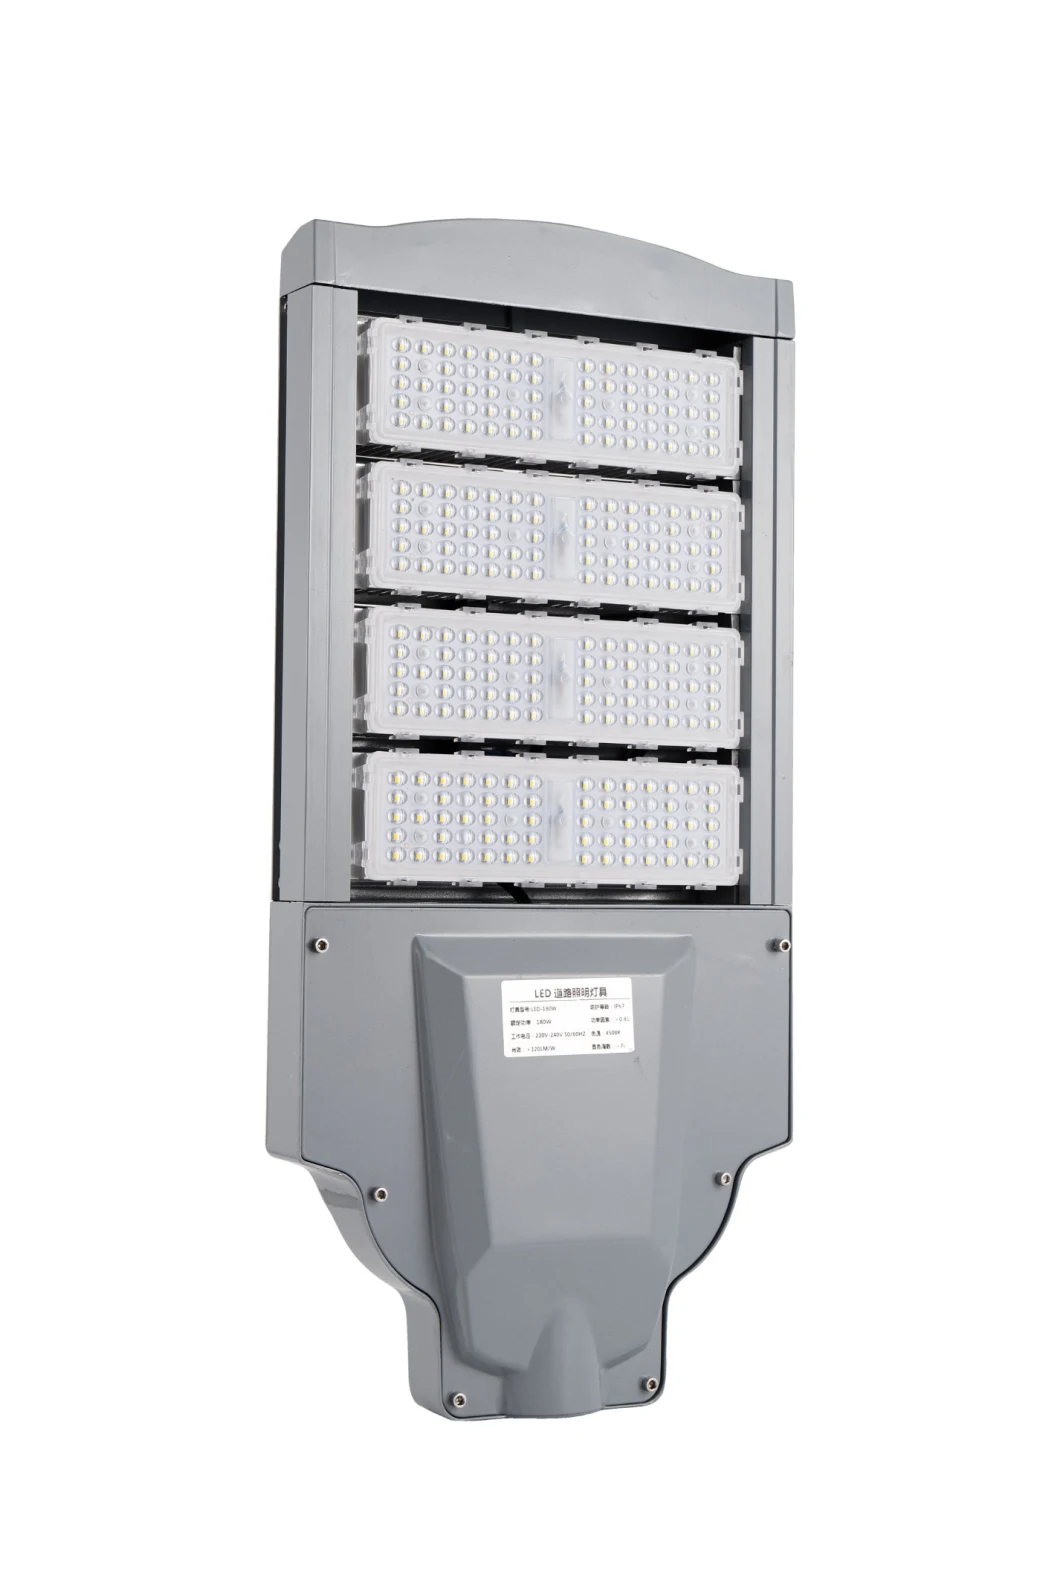 Outdoor LED Module Street Light Is Applicable to Urban and Rural Areas